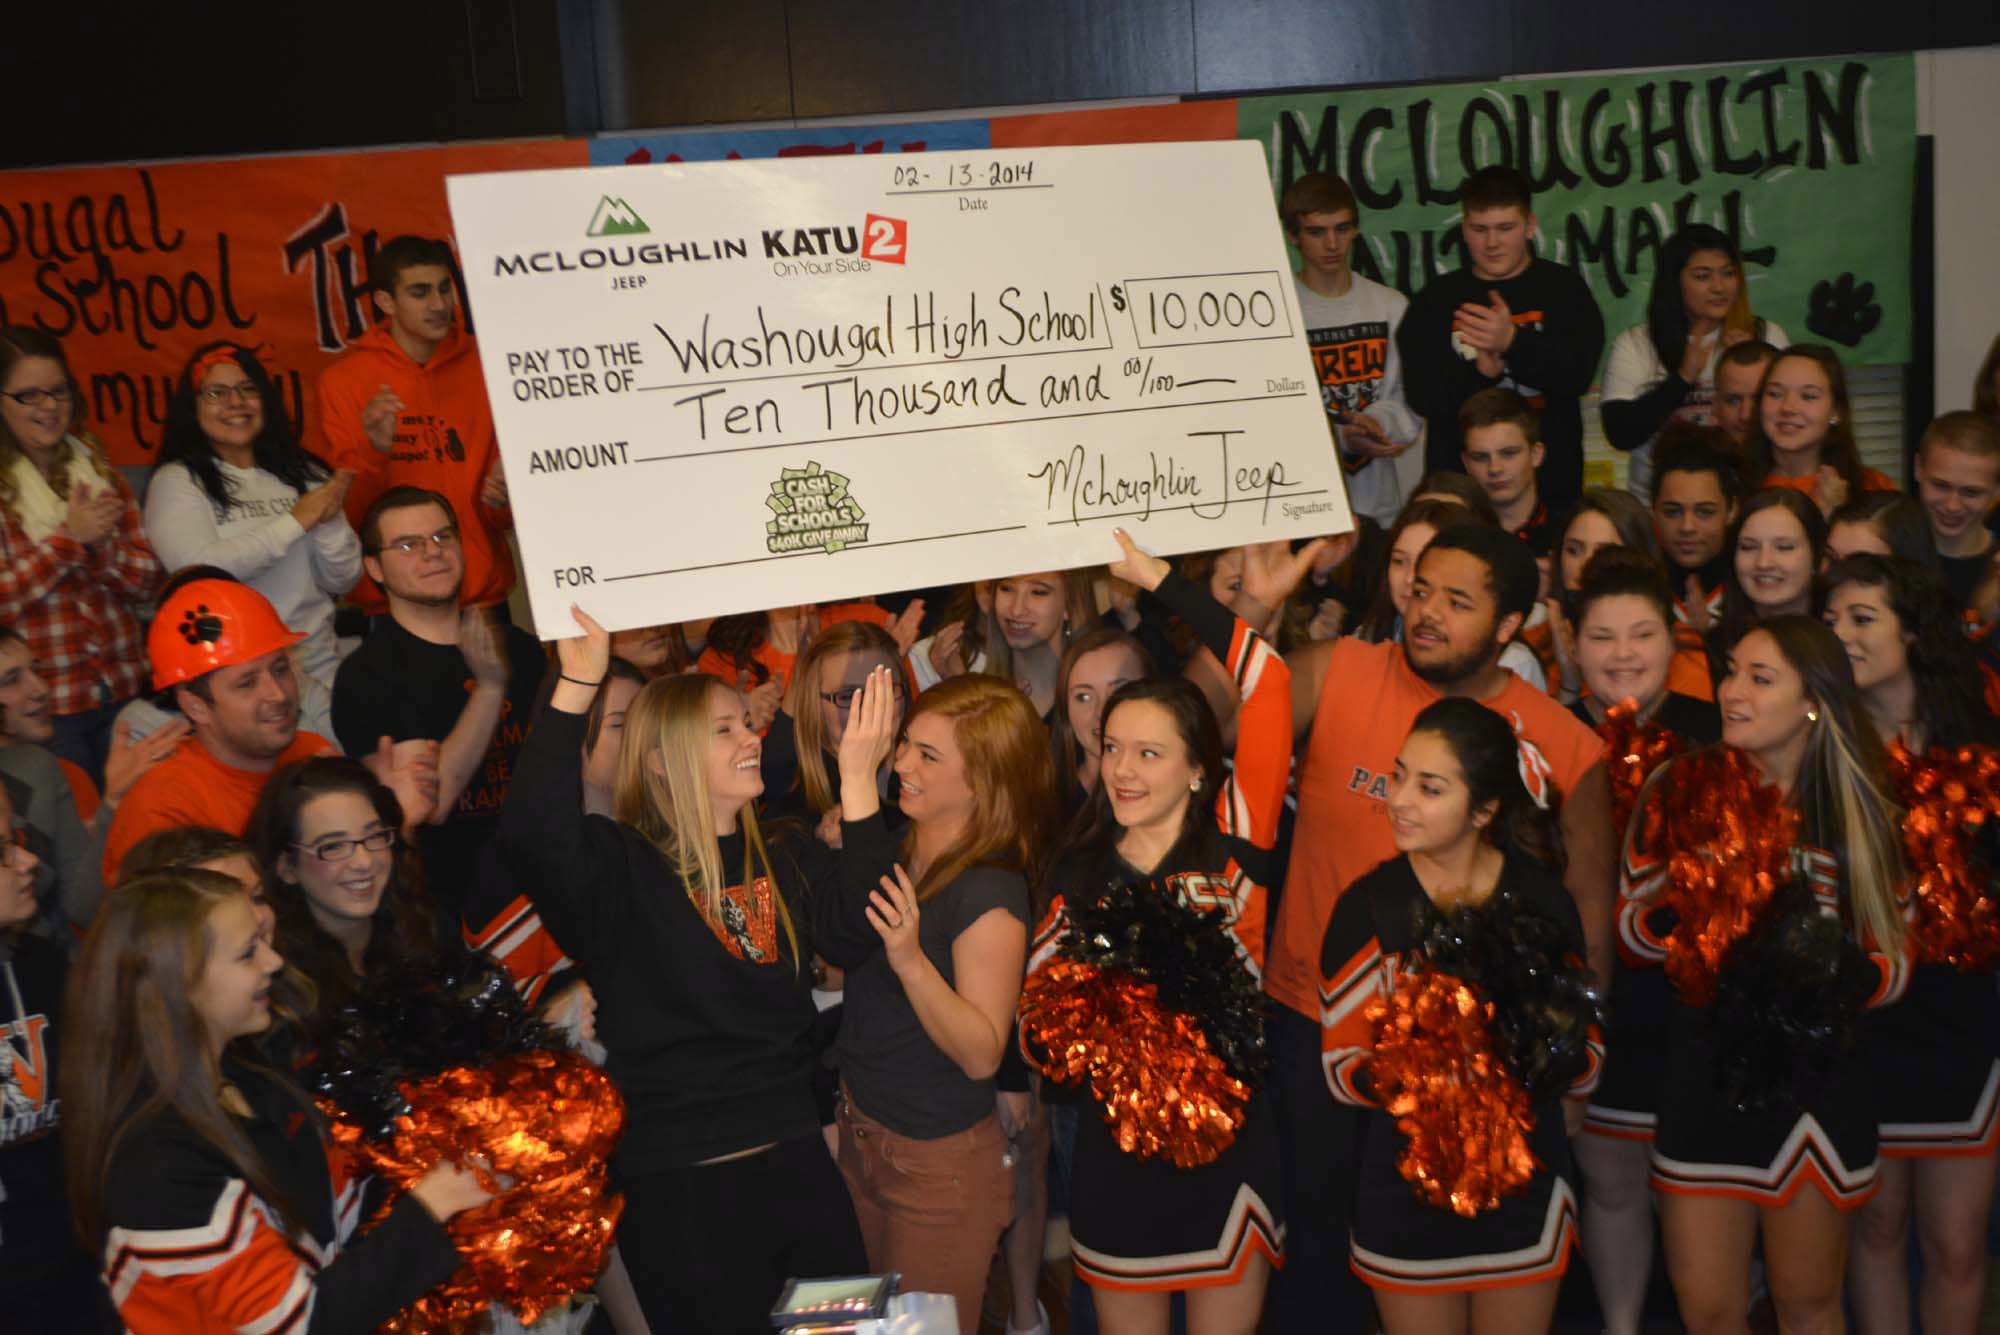 Washougal: Washougal High School students celebrate winning $10,000 from the Cash for Schools contest on Feb. 13.